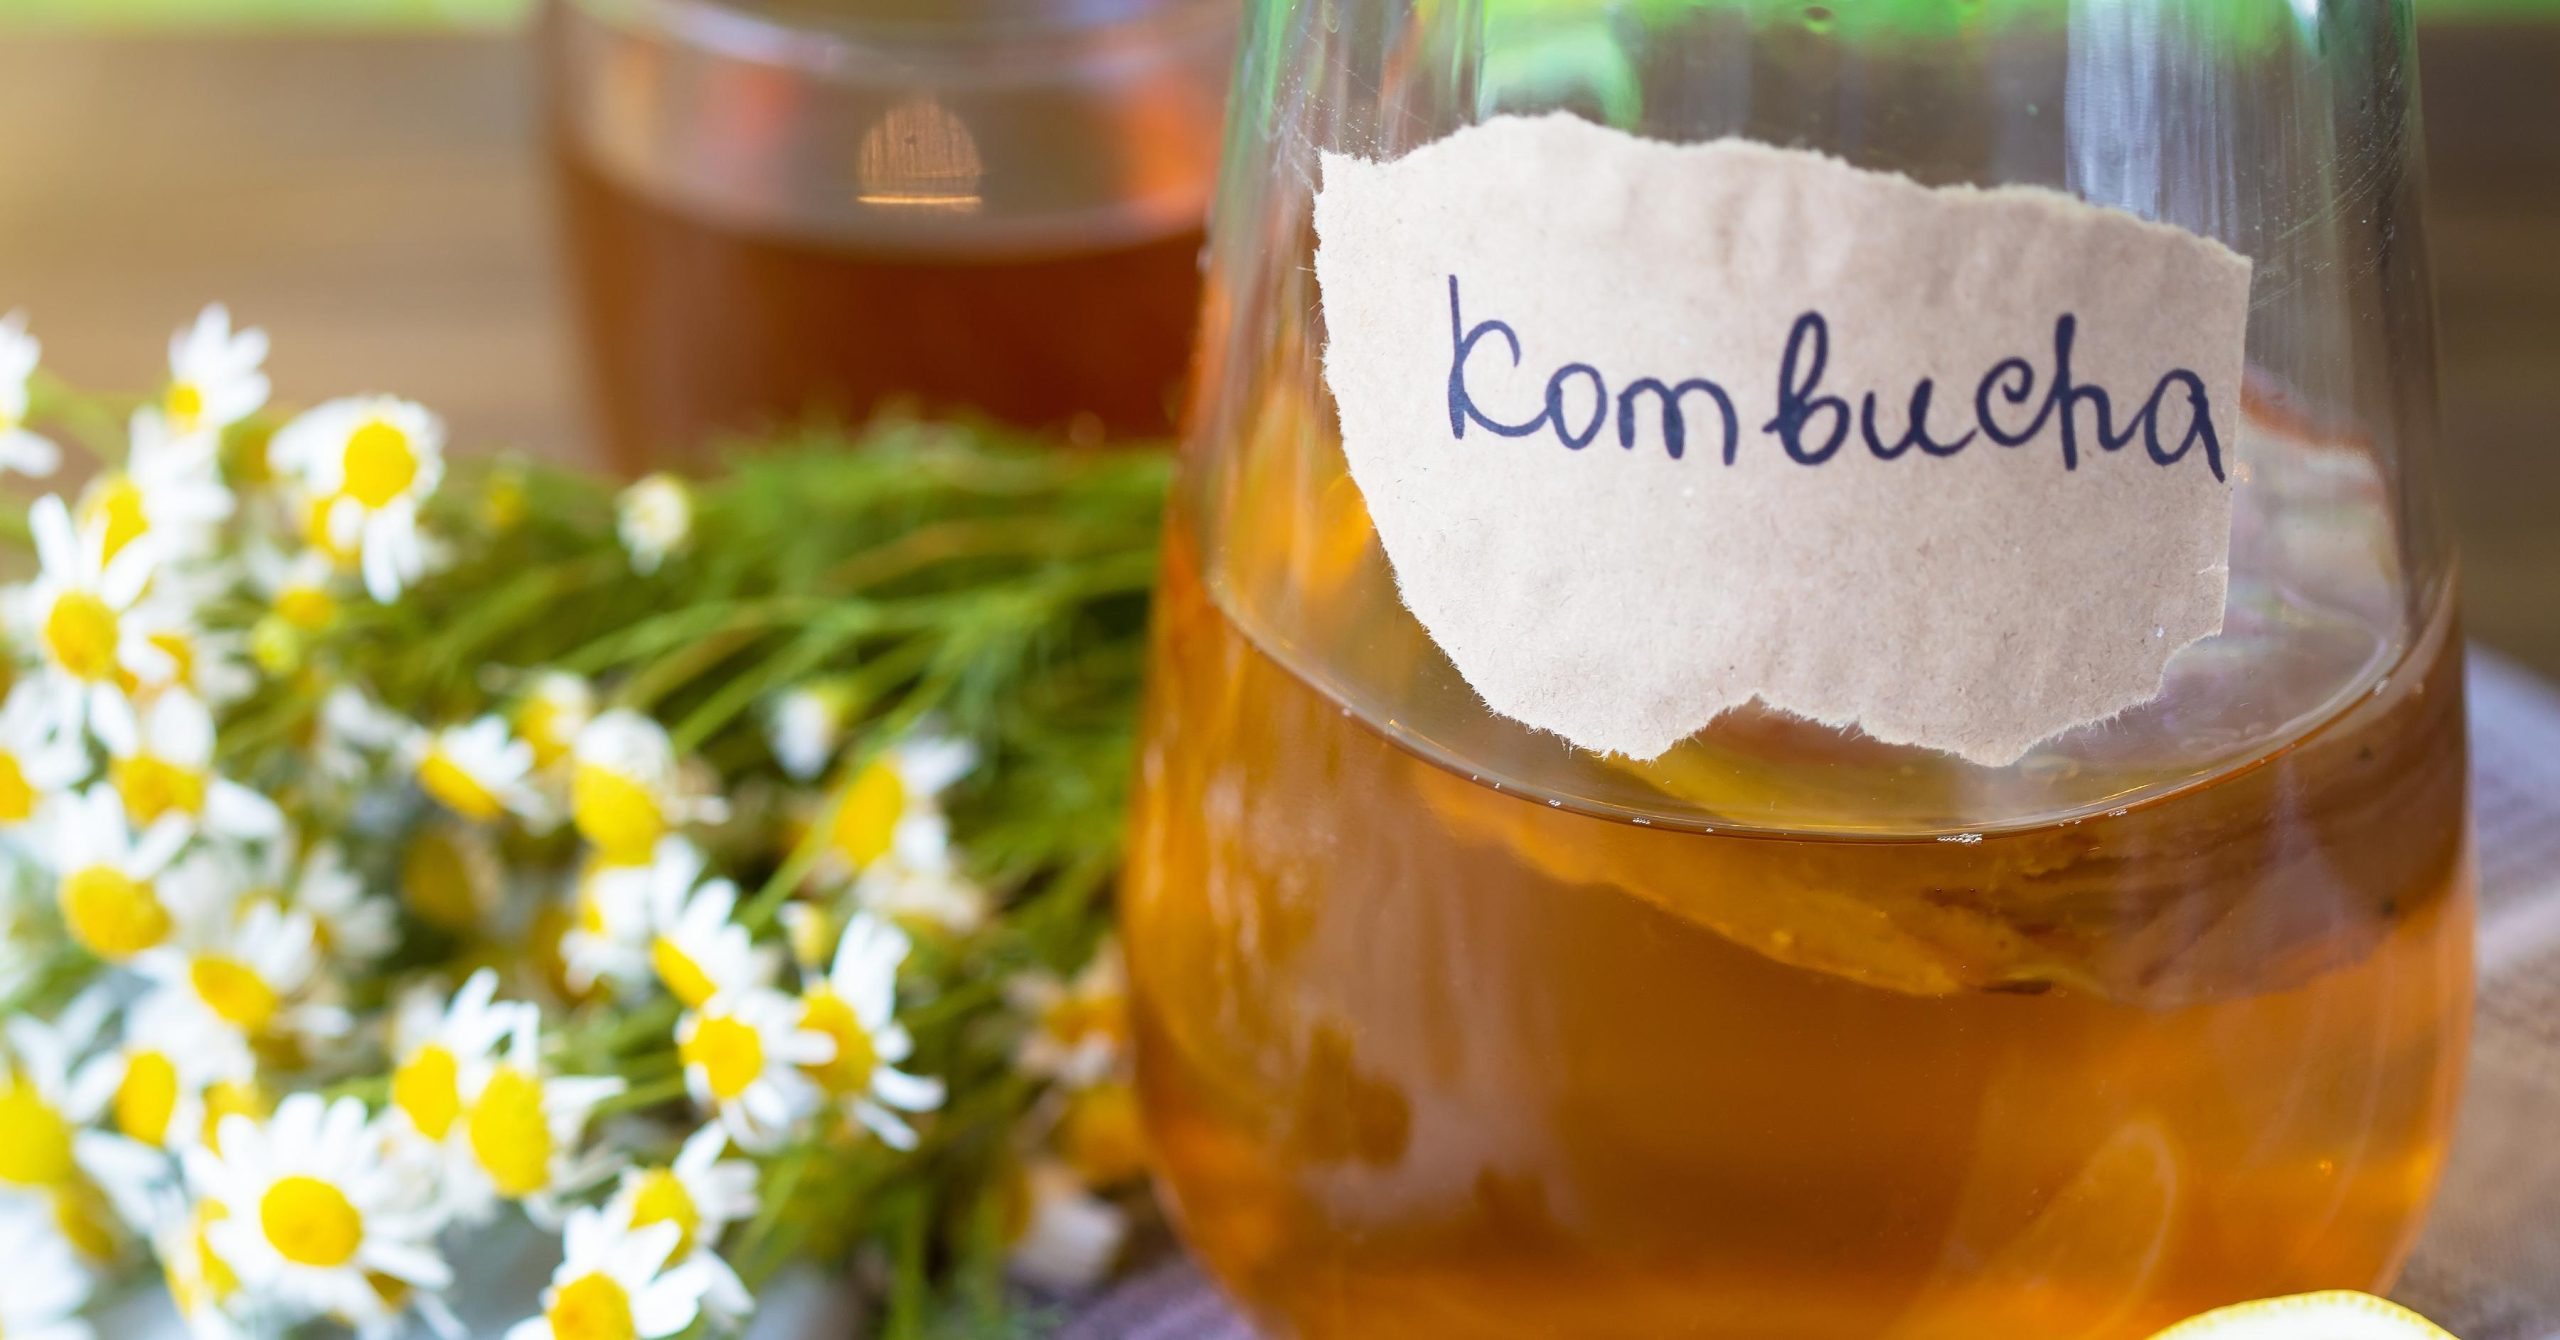 Can Kombucha Cause Yeast Infections